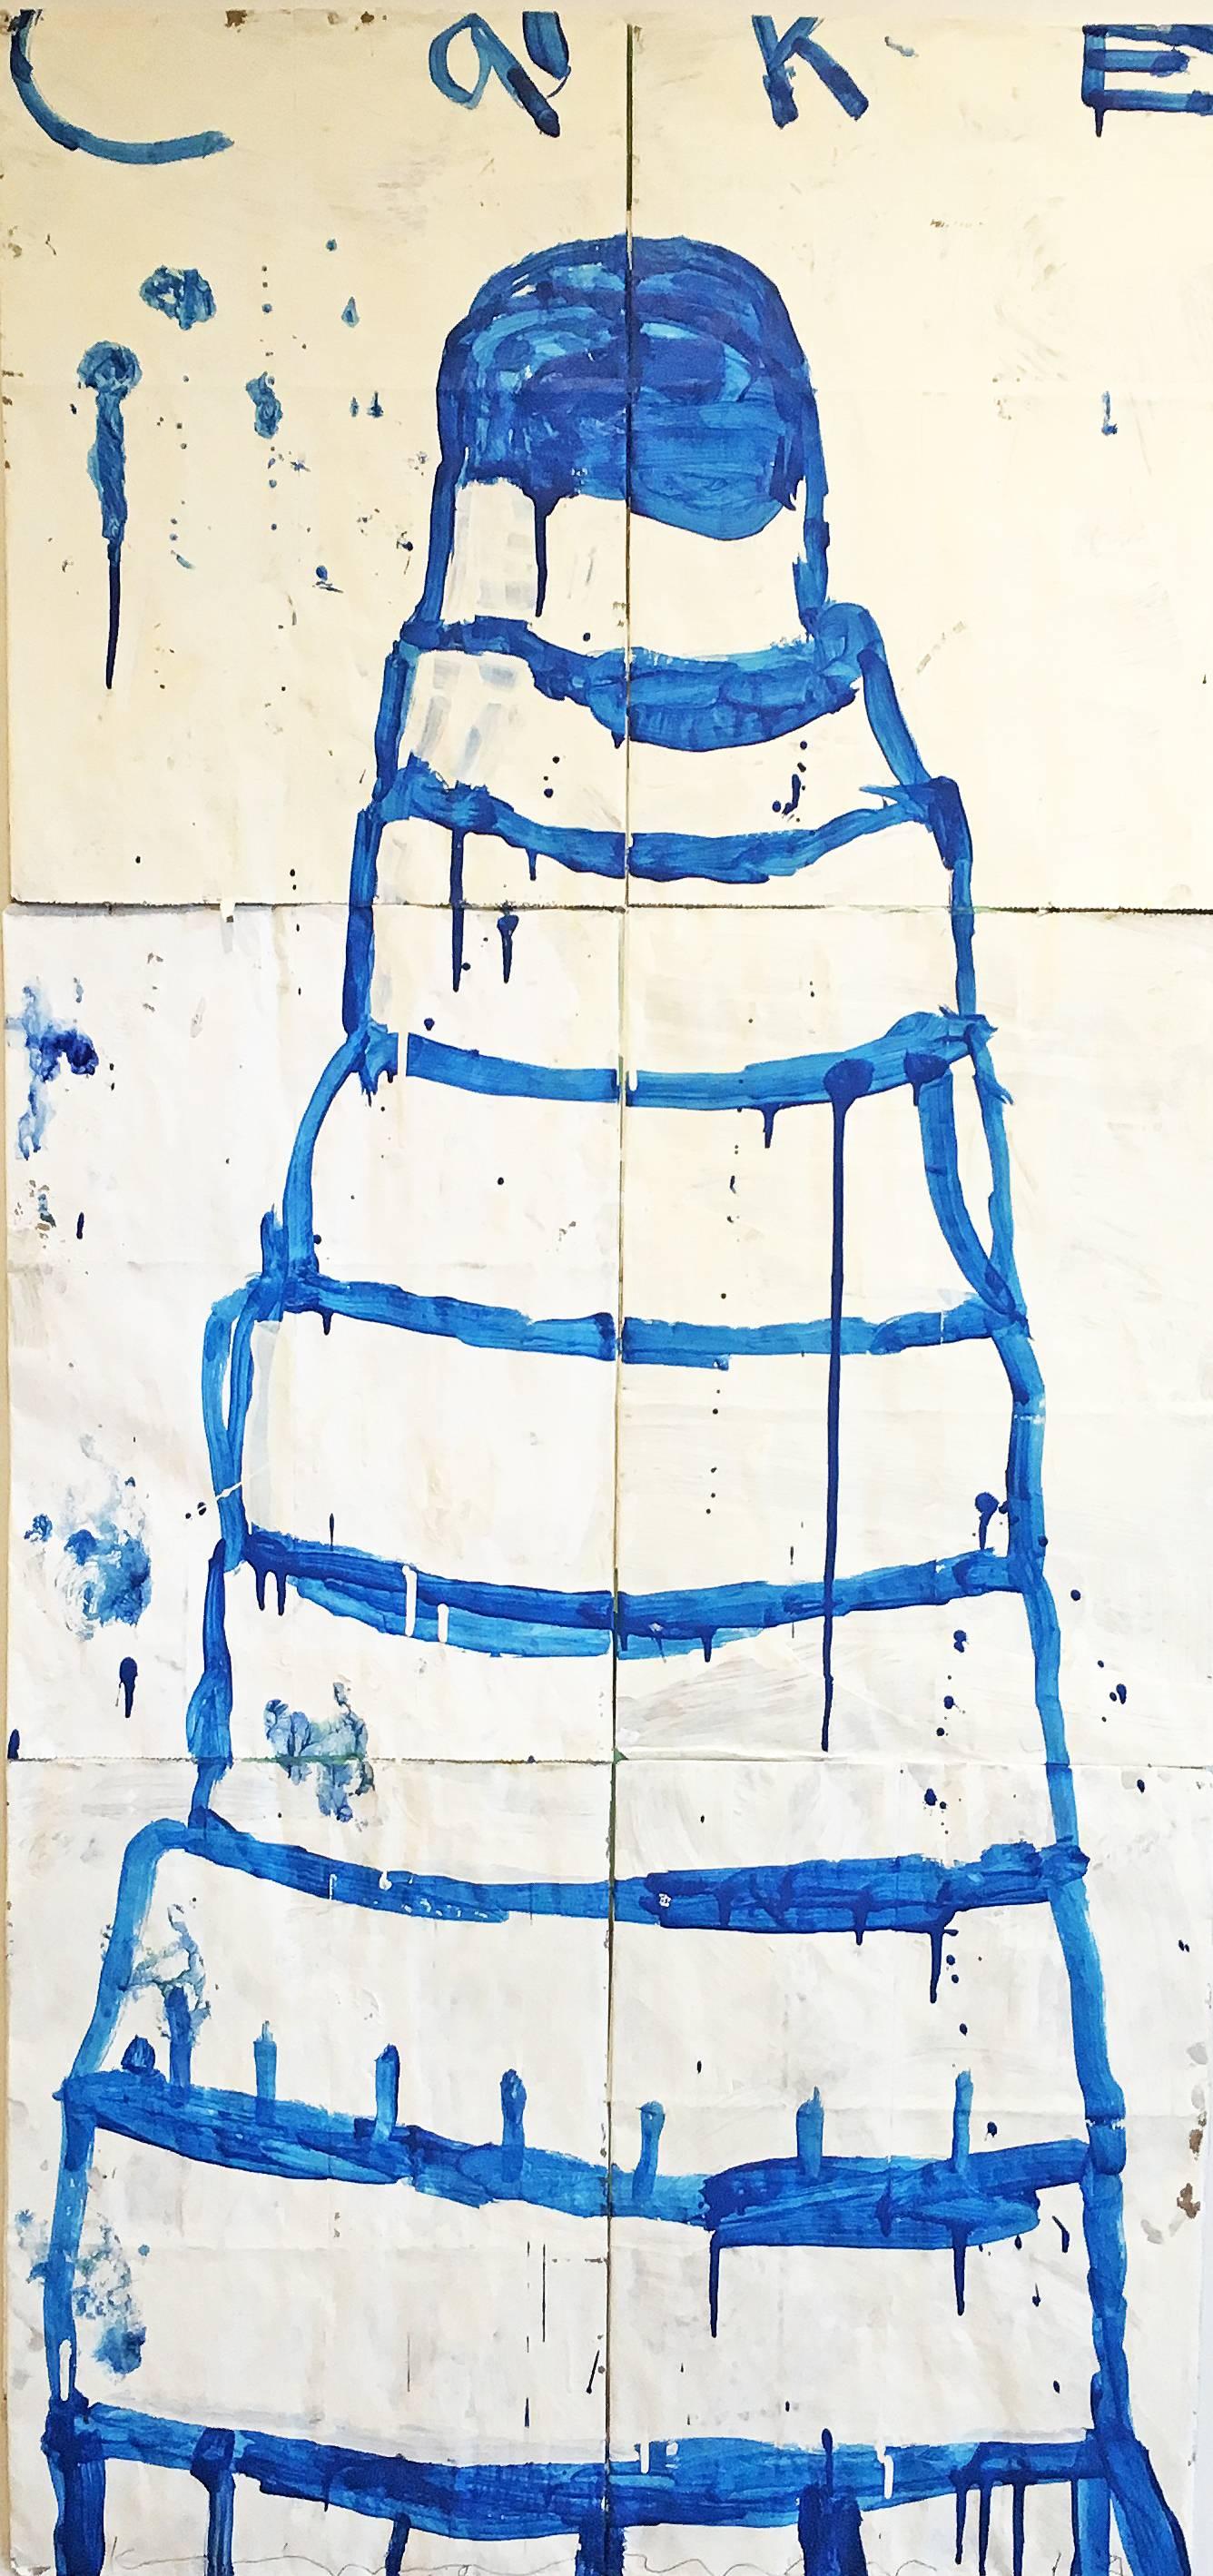 'Cake (Blue on Crème)' by contemporary artist, Gary Komarin, 2014. Acrylic on paper bags, 50 x 23.75 inches. This faux naive style painting of a 8.5-tier cake is outlined in royal blue on a creme background. 

In his delightful, naively drawn Cakes